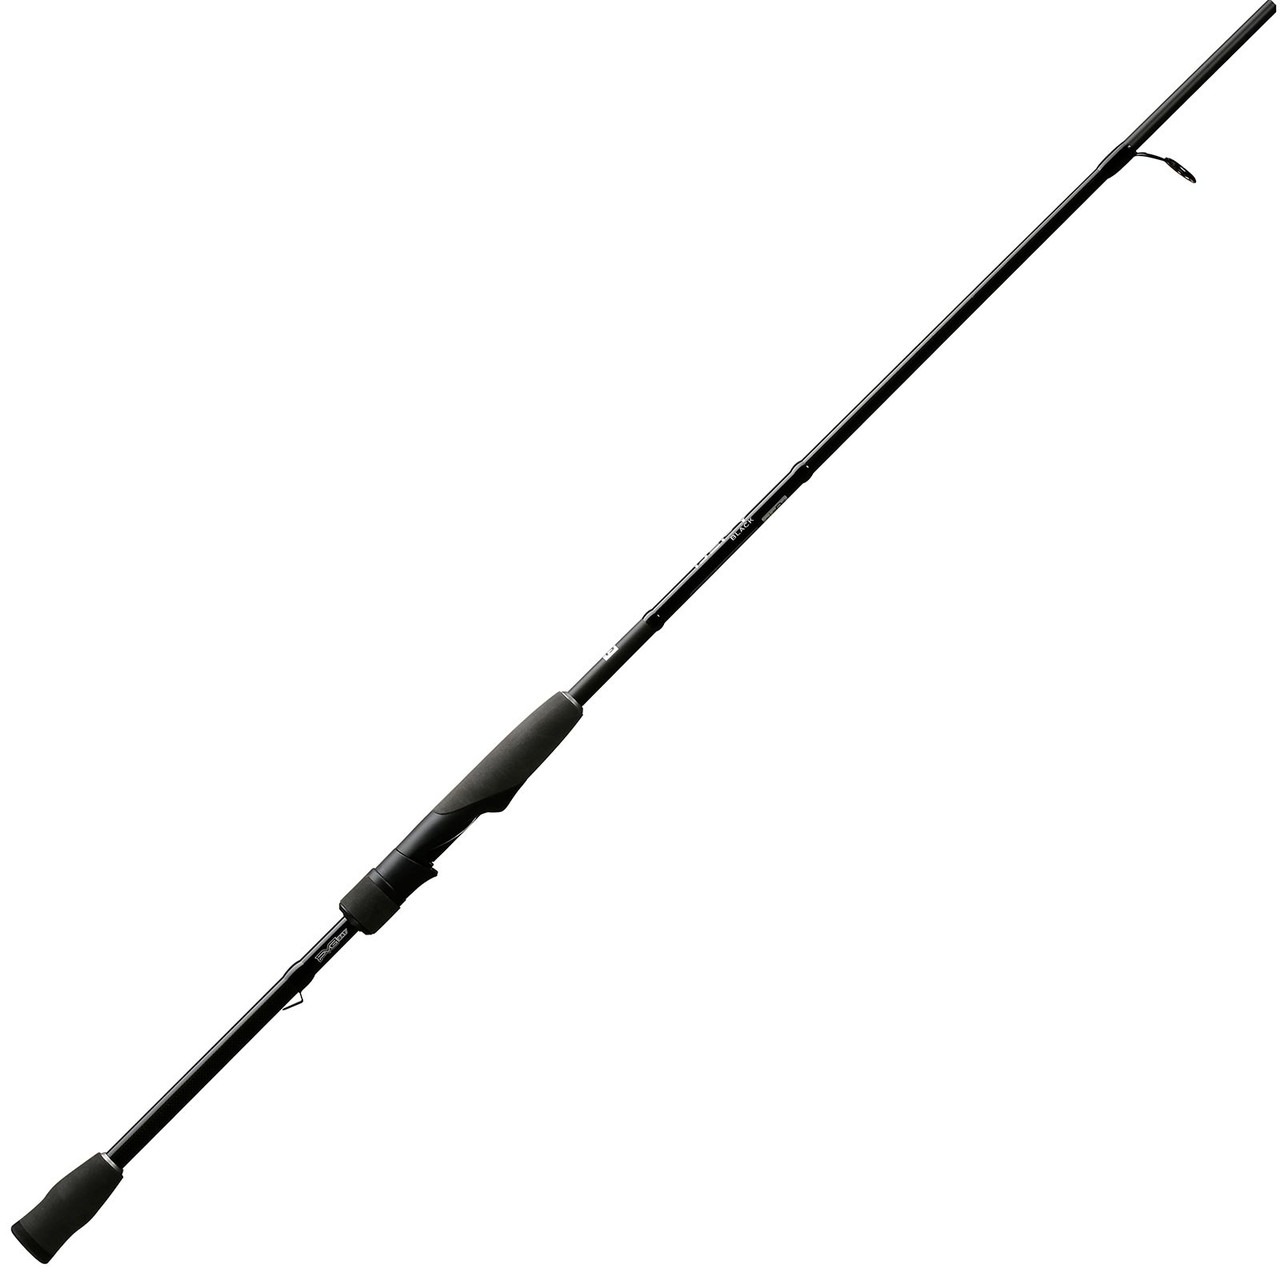 13 Fishing 1130225 7 ft. Fate 2 in. Light Spinning Rod, Black 